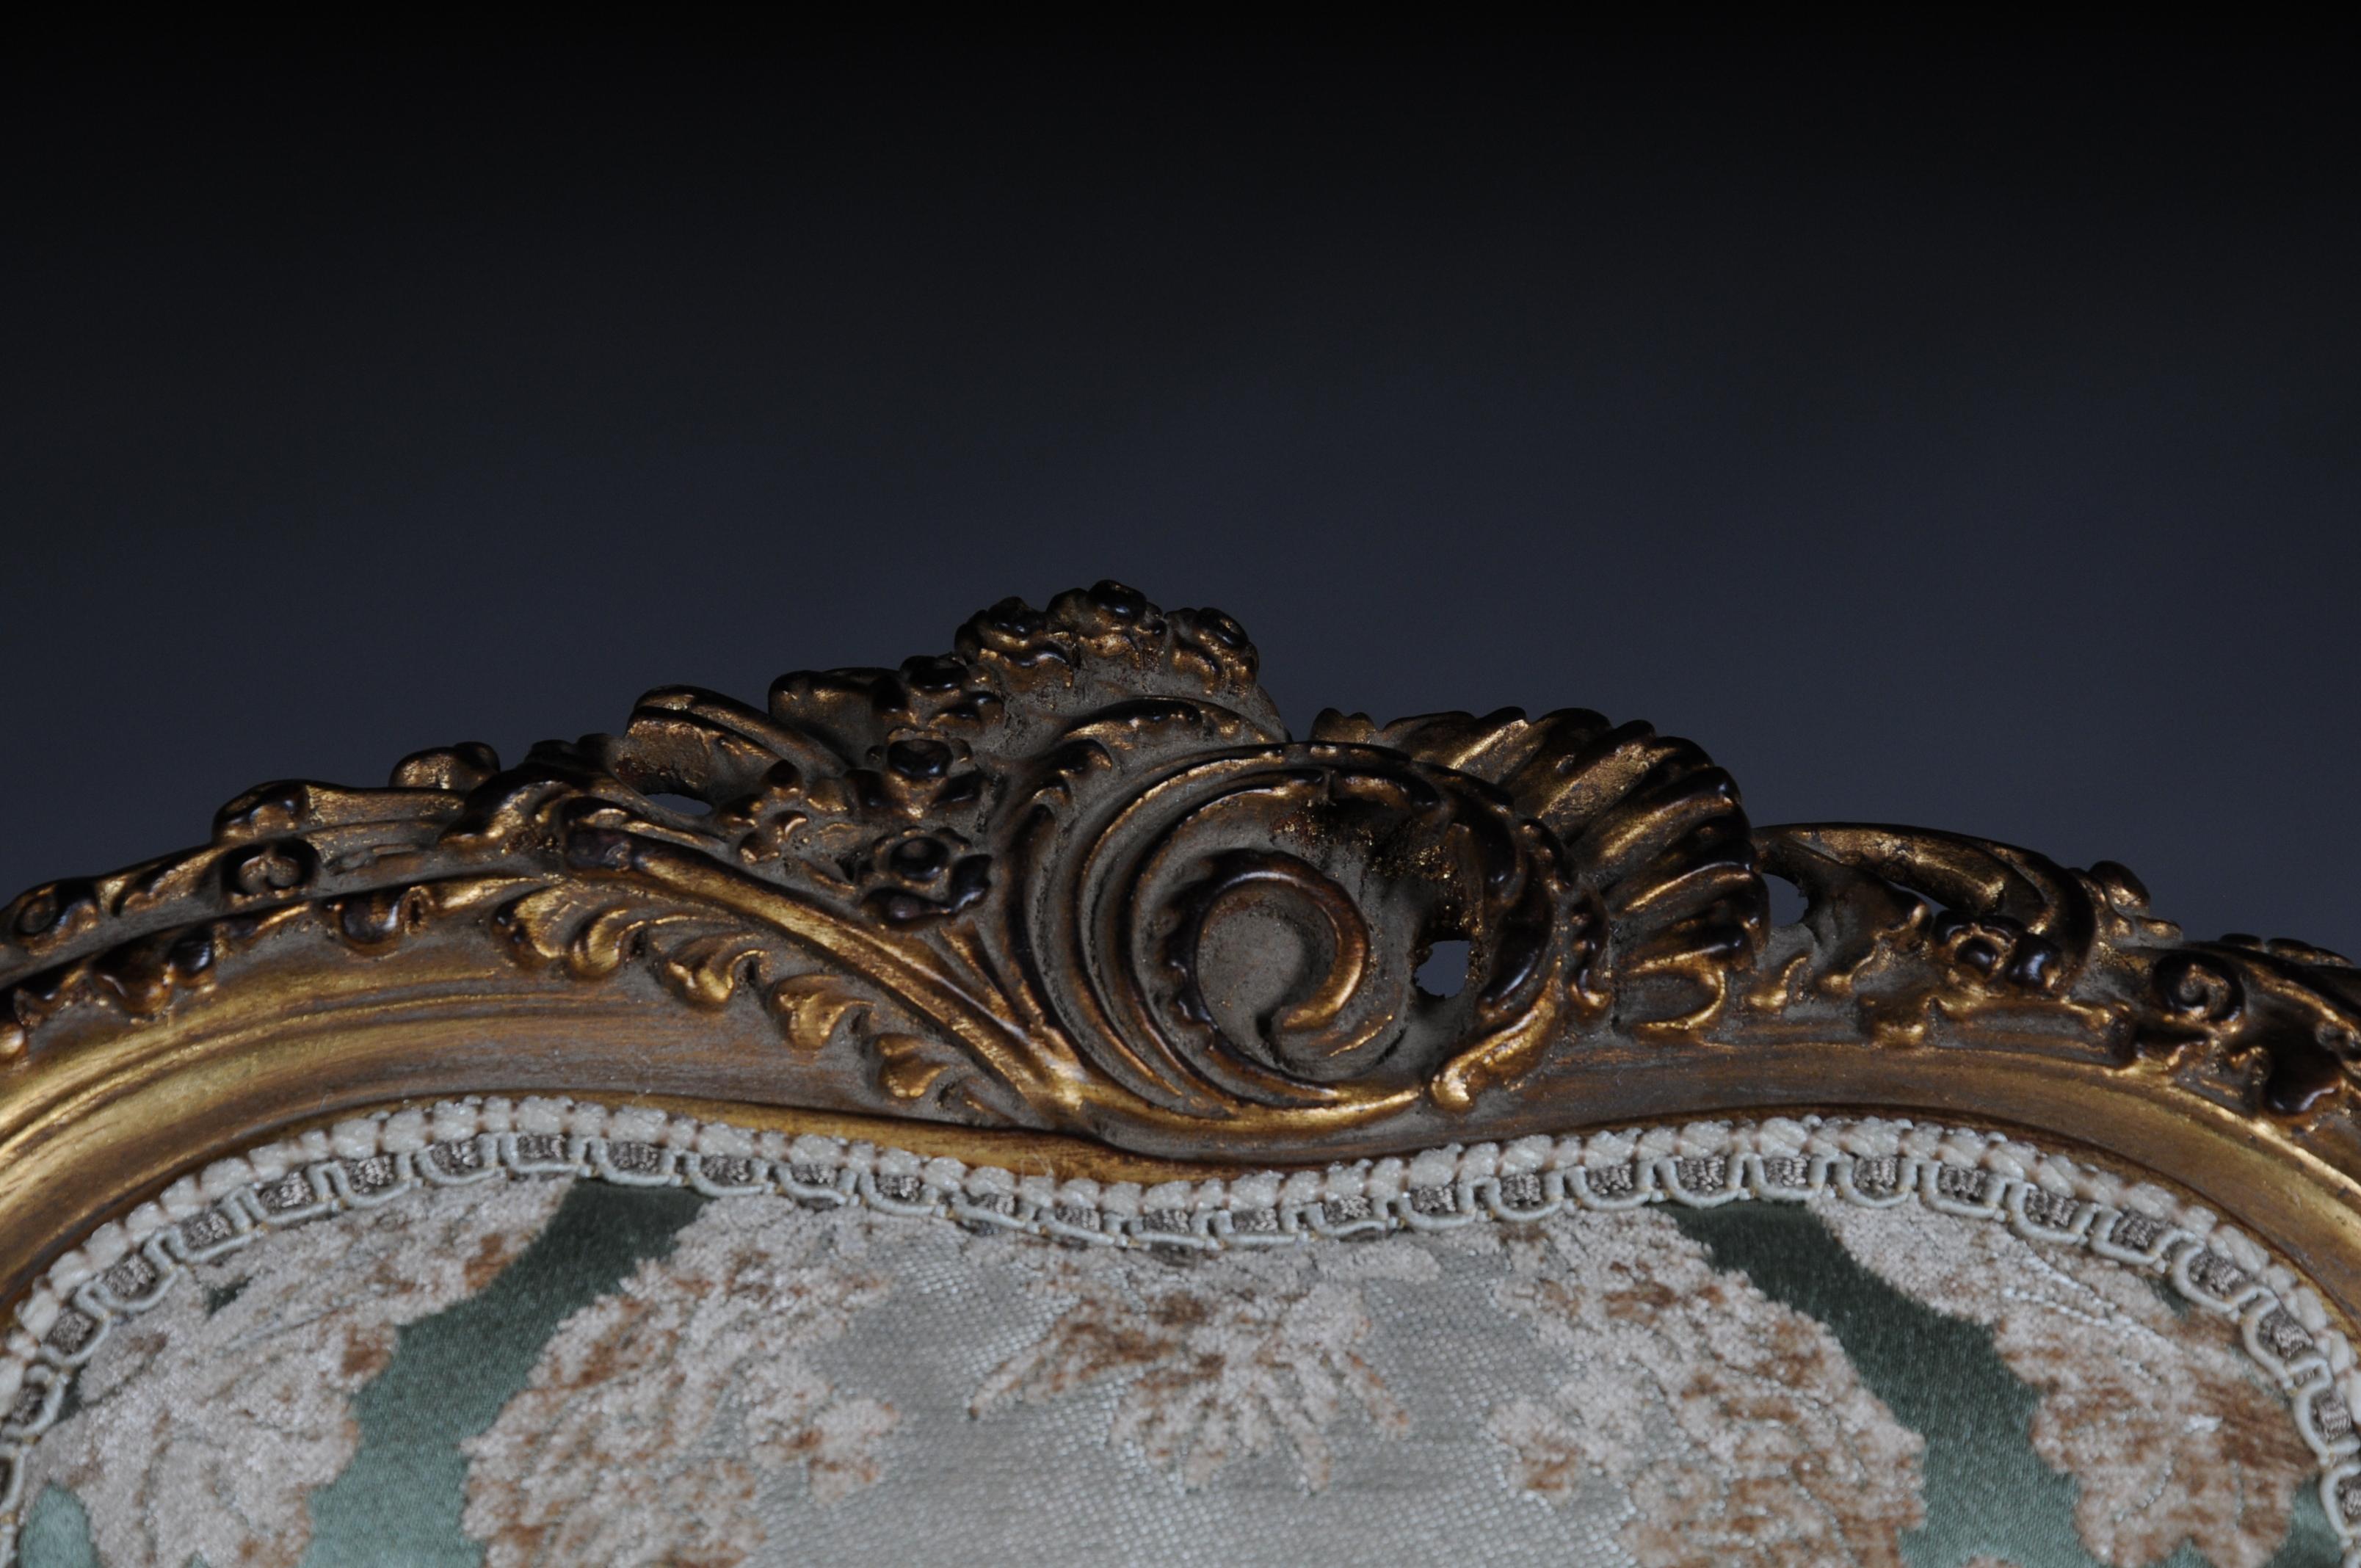 rococo couch